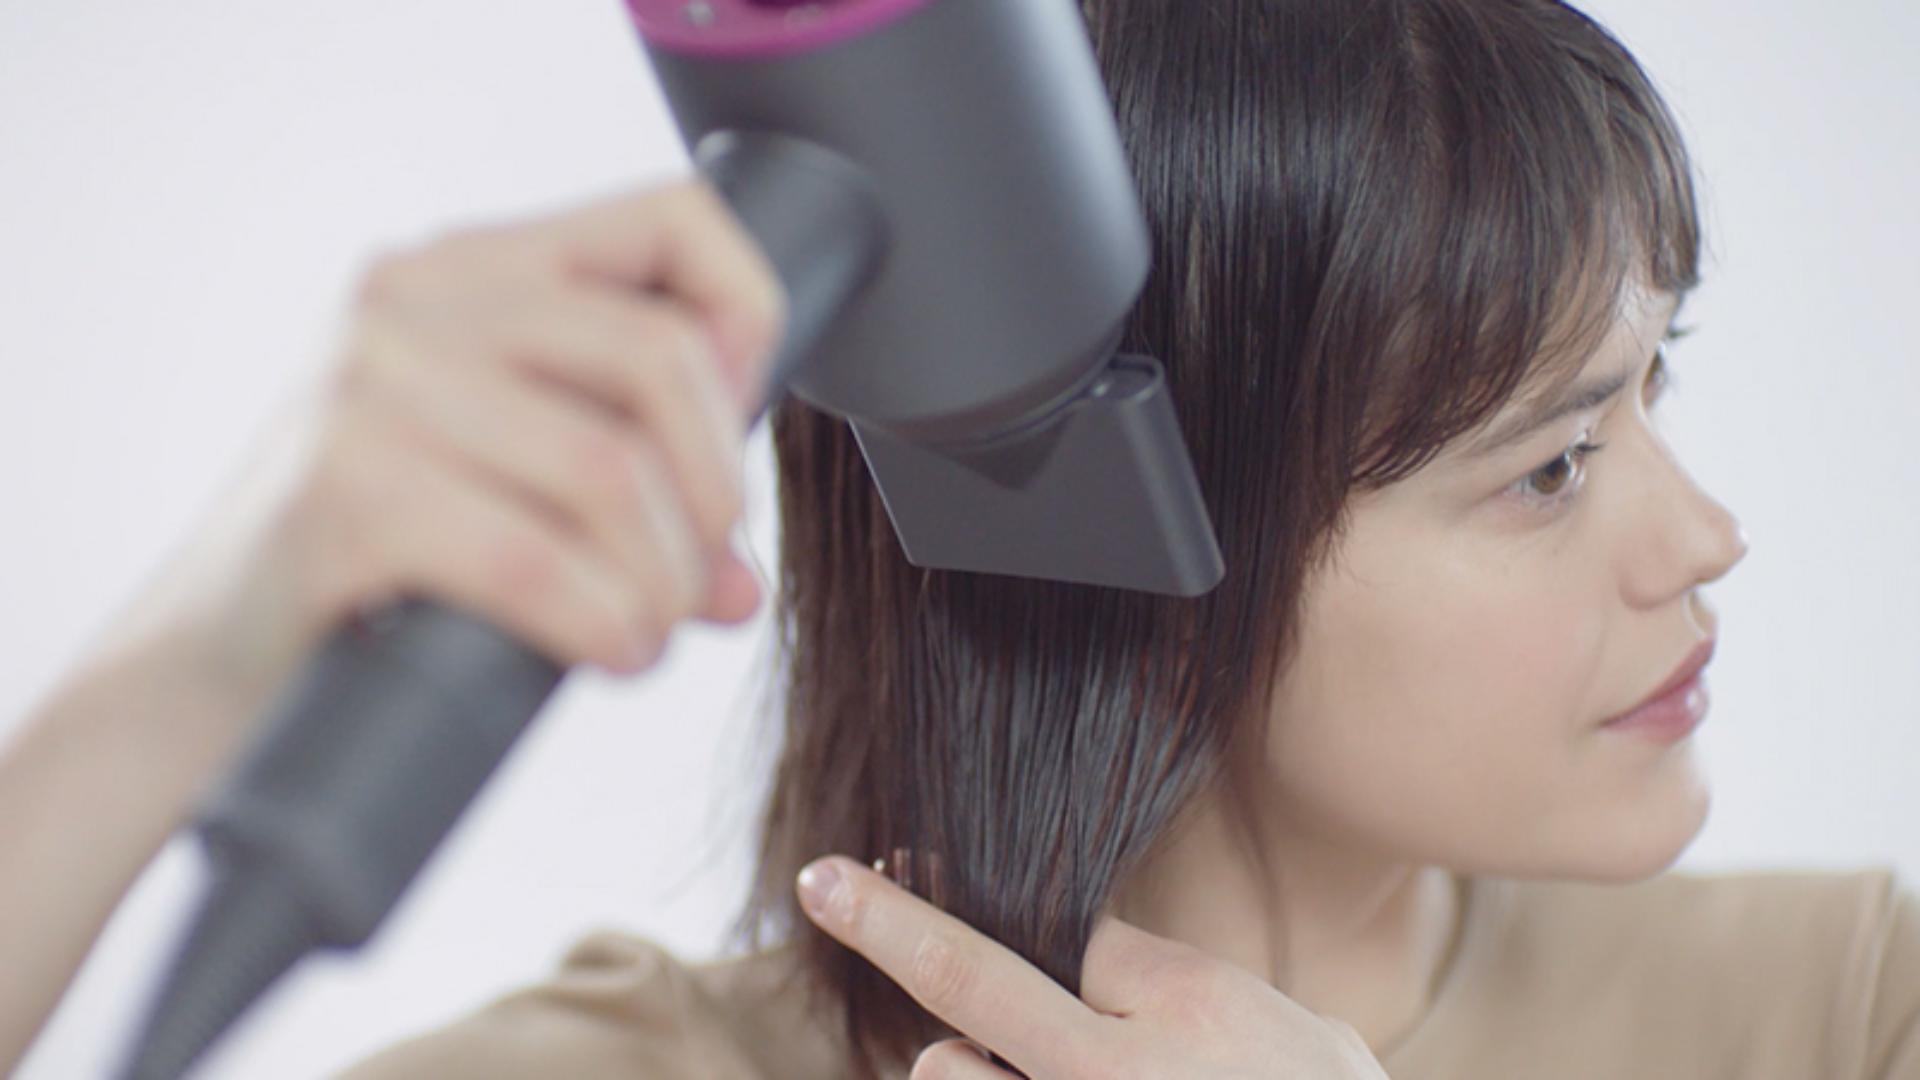 Video about how to use the Dyson Supersonic™ hair dryer Styling concentrator